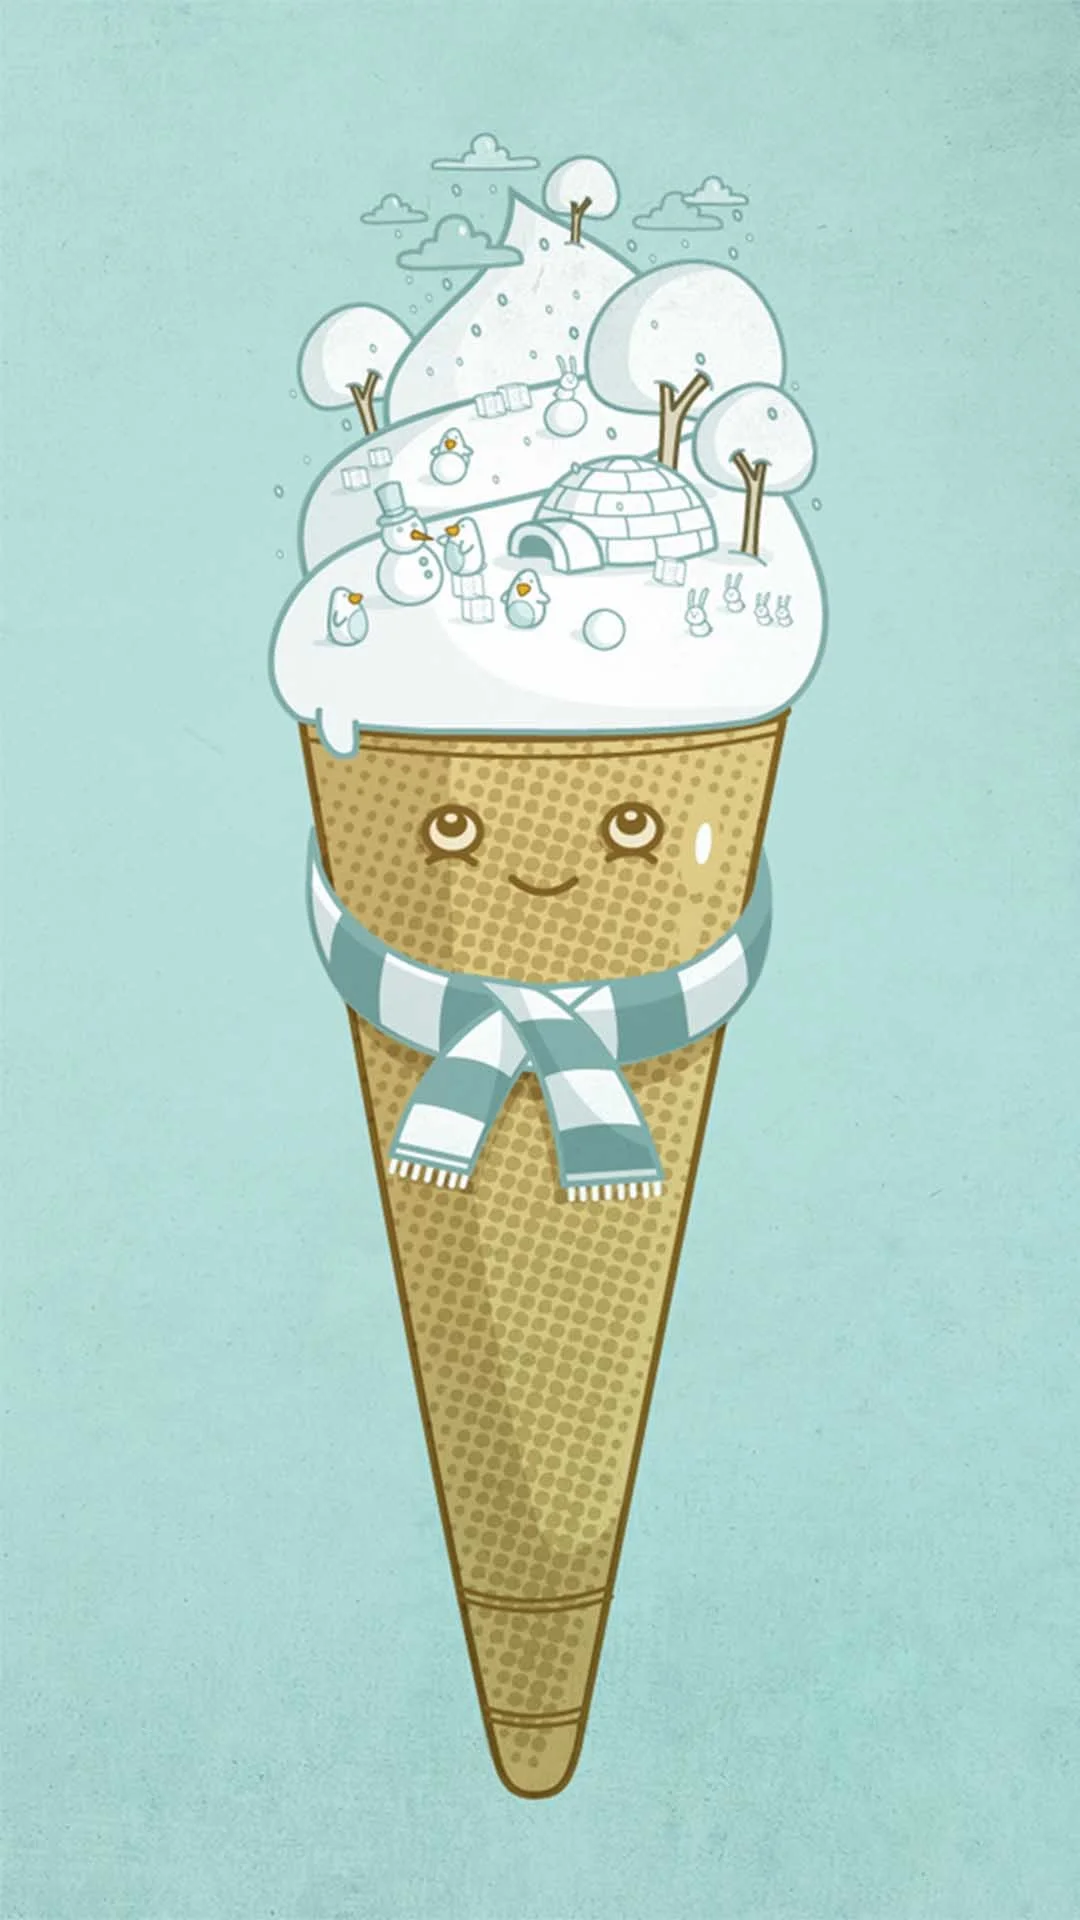 Tap image for more cute funny iPhone wallpaper Ice cream – mobile9 Wallpapers